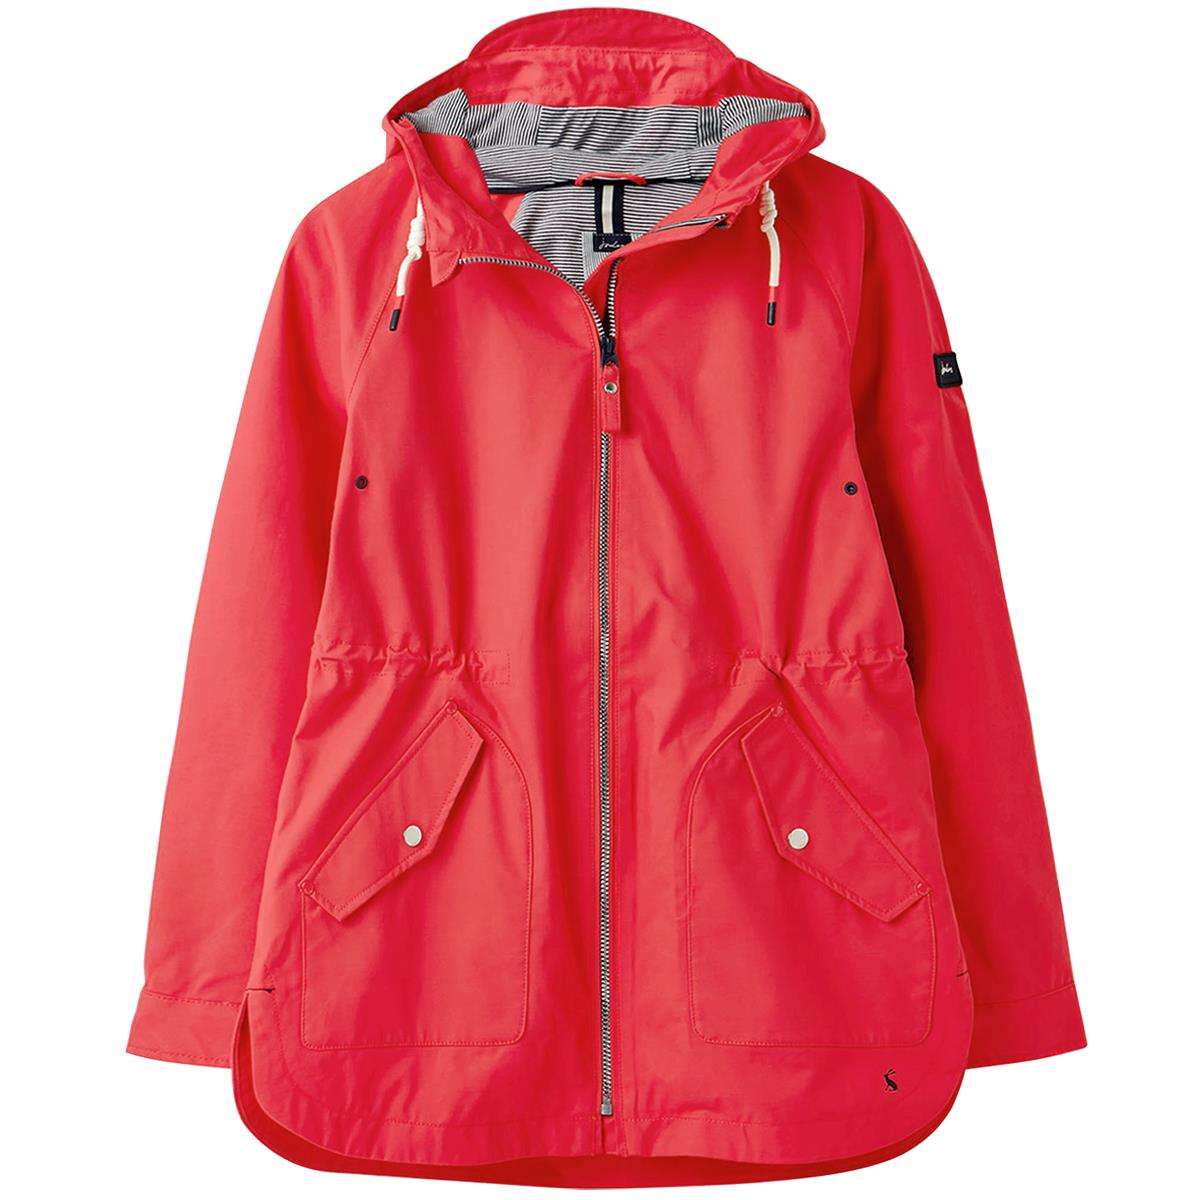 What materials make up the Joules Shoreside Coastal Waterproof Jacket?